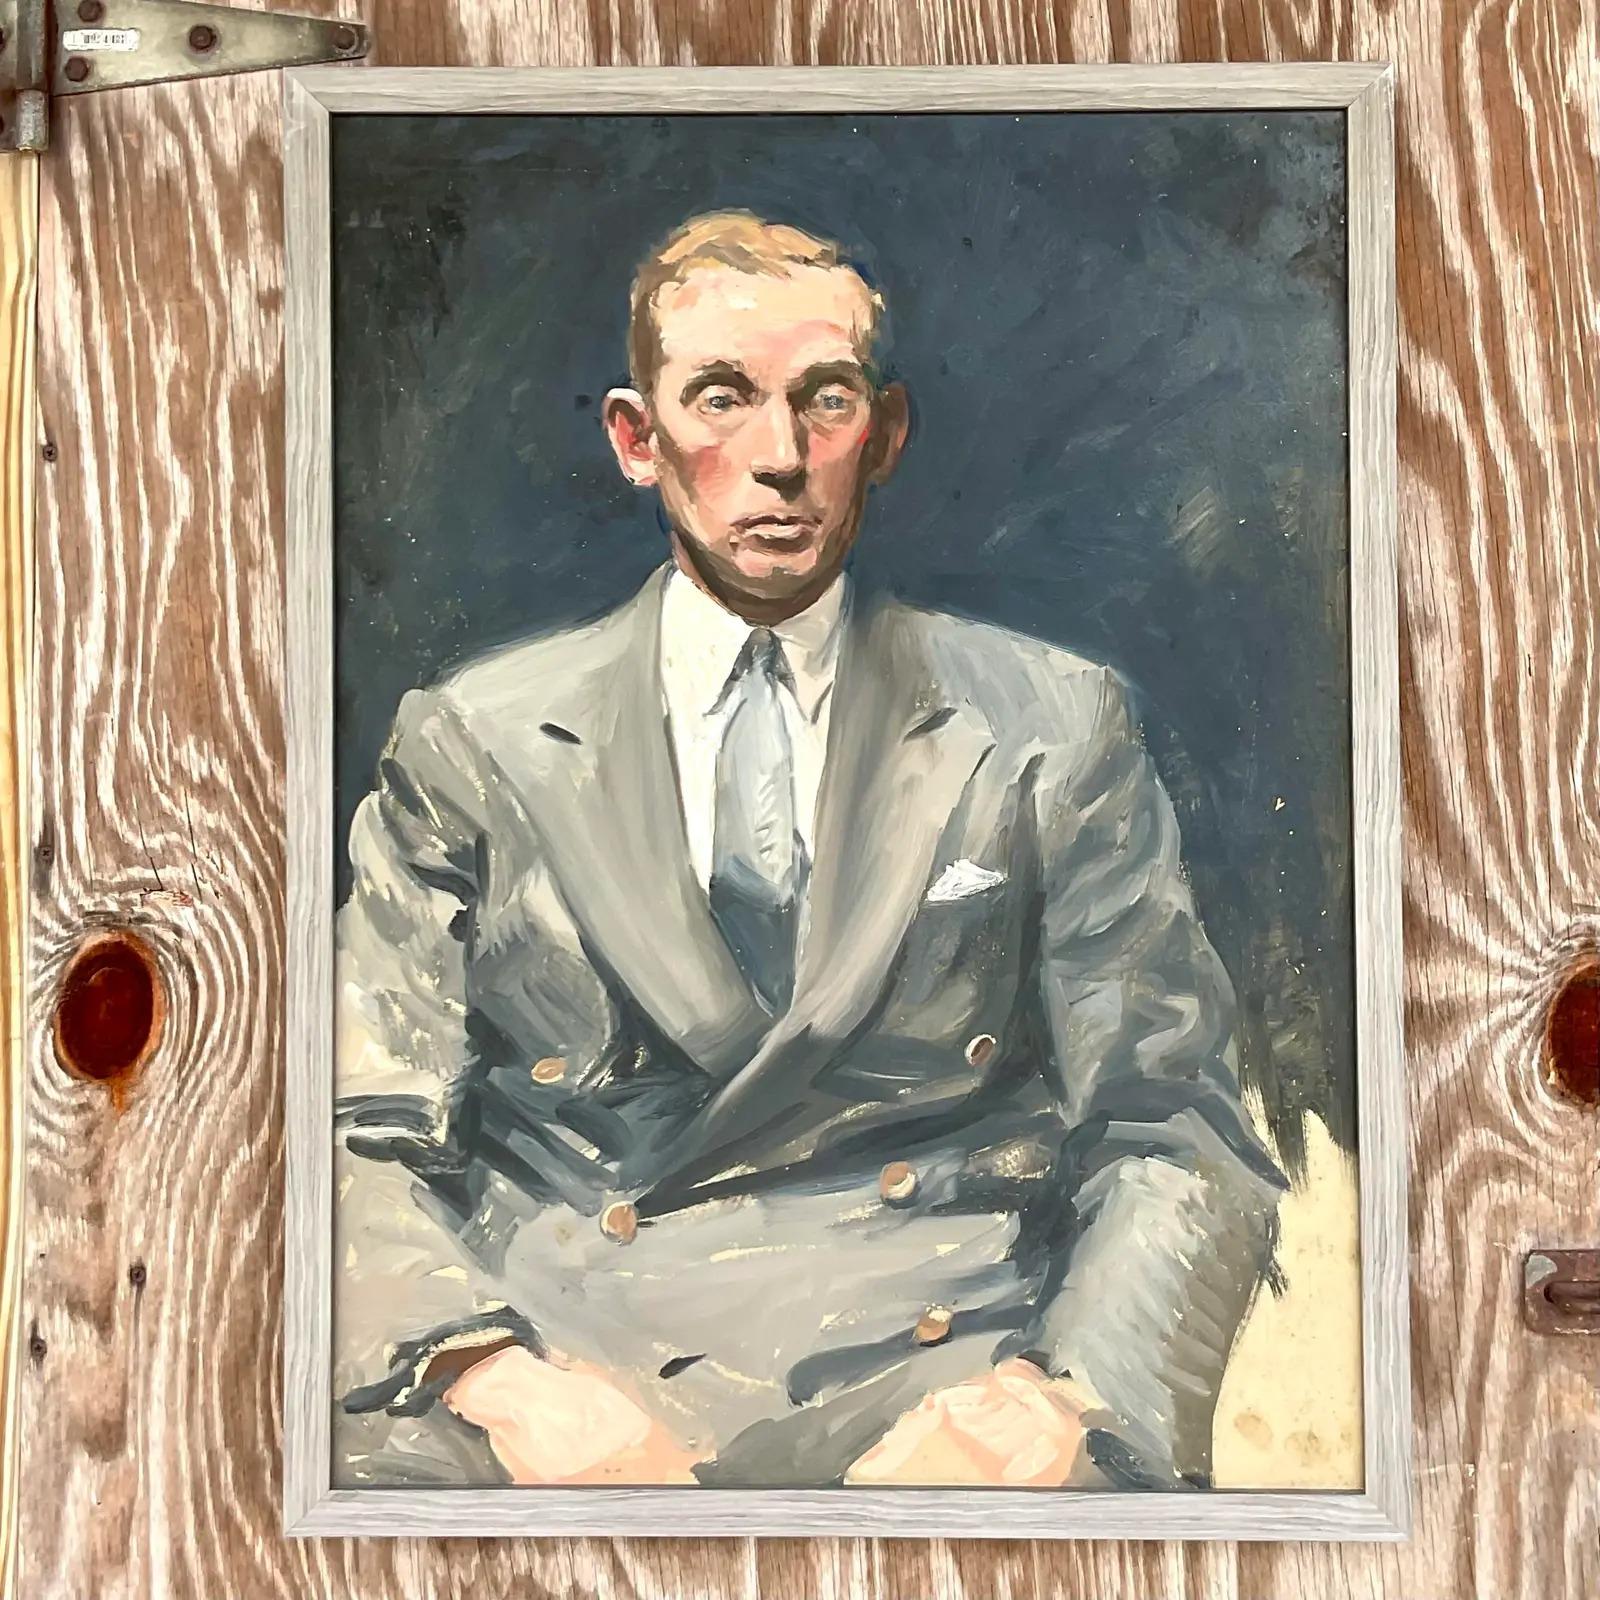 Fantastic vintage Boho original oil portrait on board. A chic study in grey of a fine gentleman. Beautiful impressionist style with a very painterly look. Unsigned. Acquired from a Palm Beach estate.